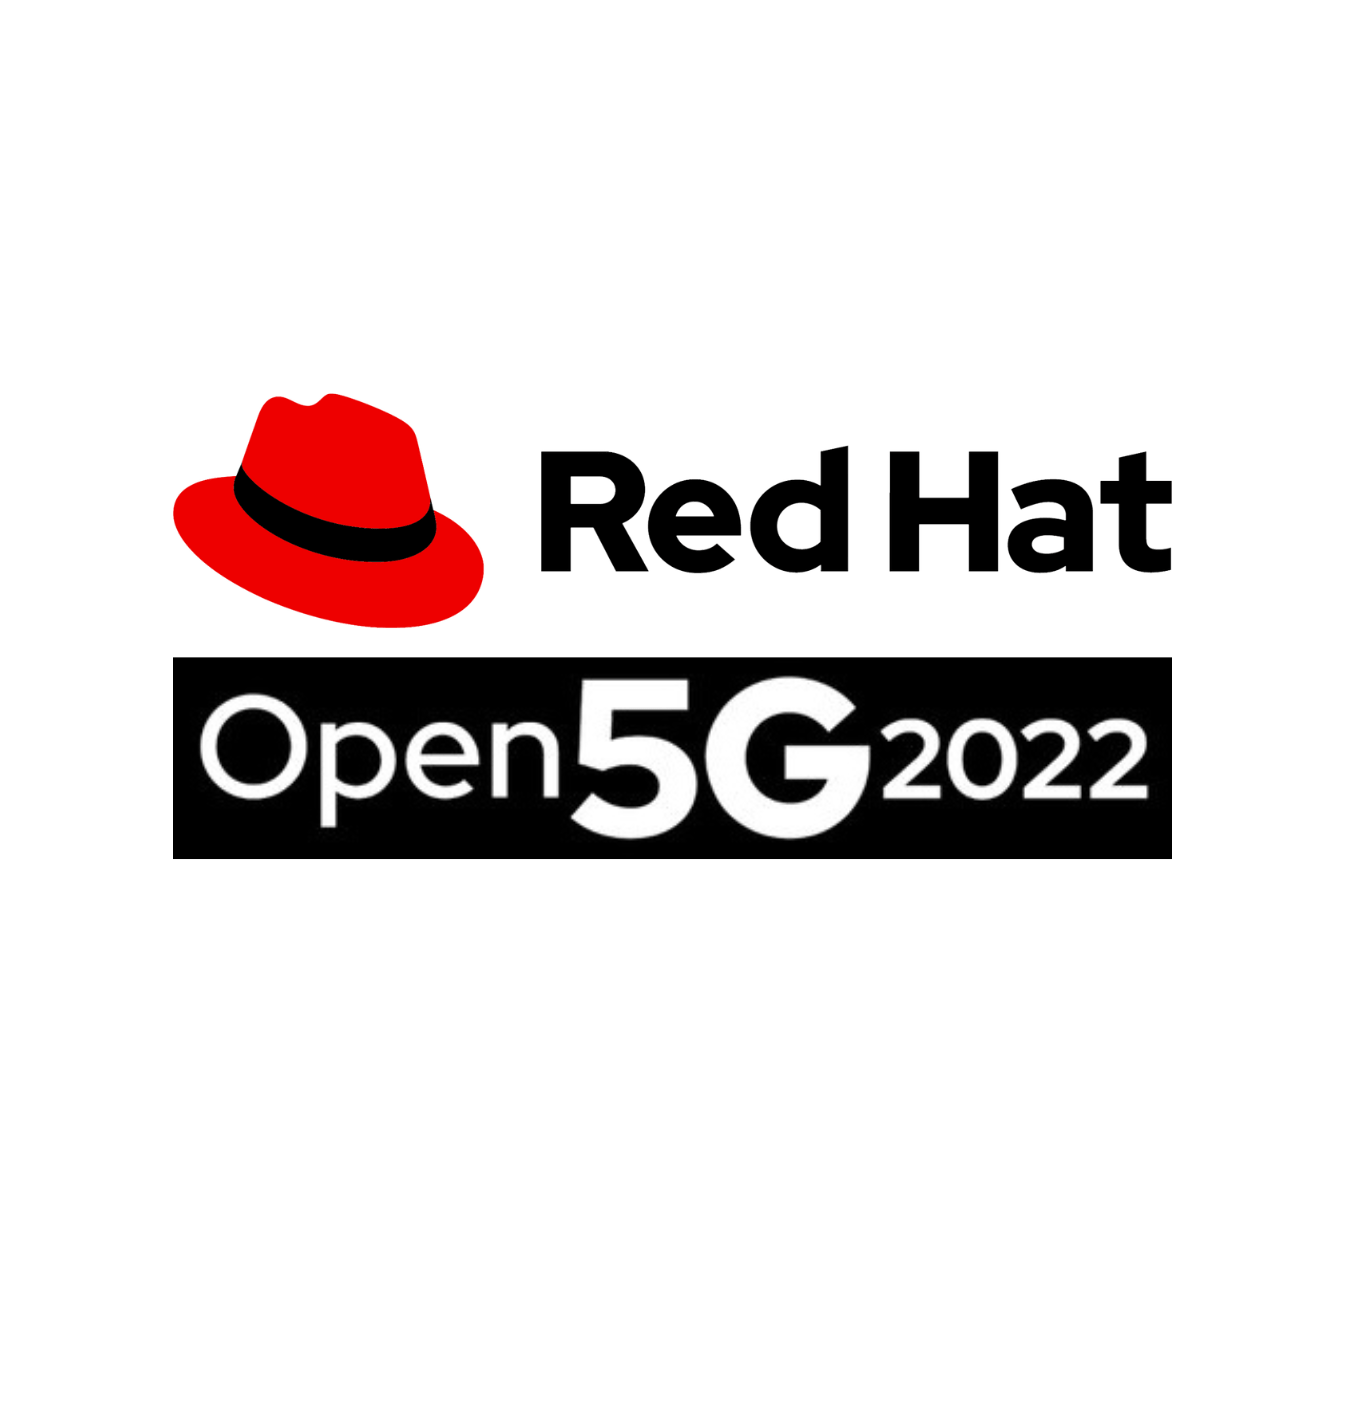 Red Hat Open 5G 2022